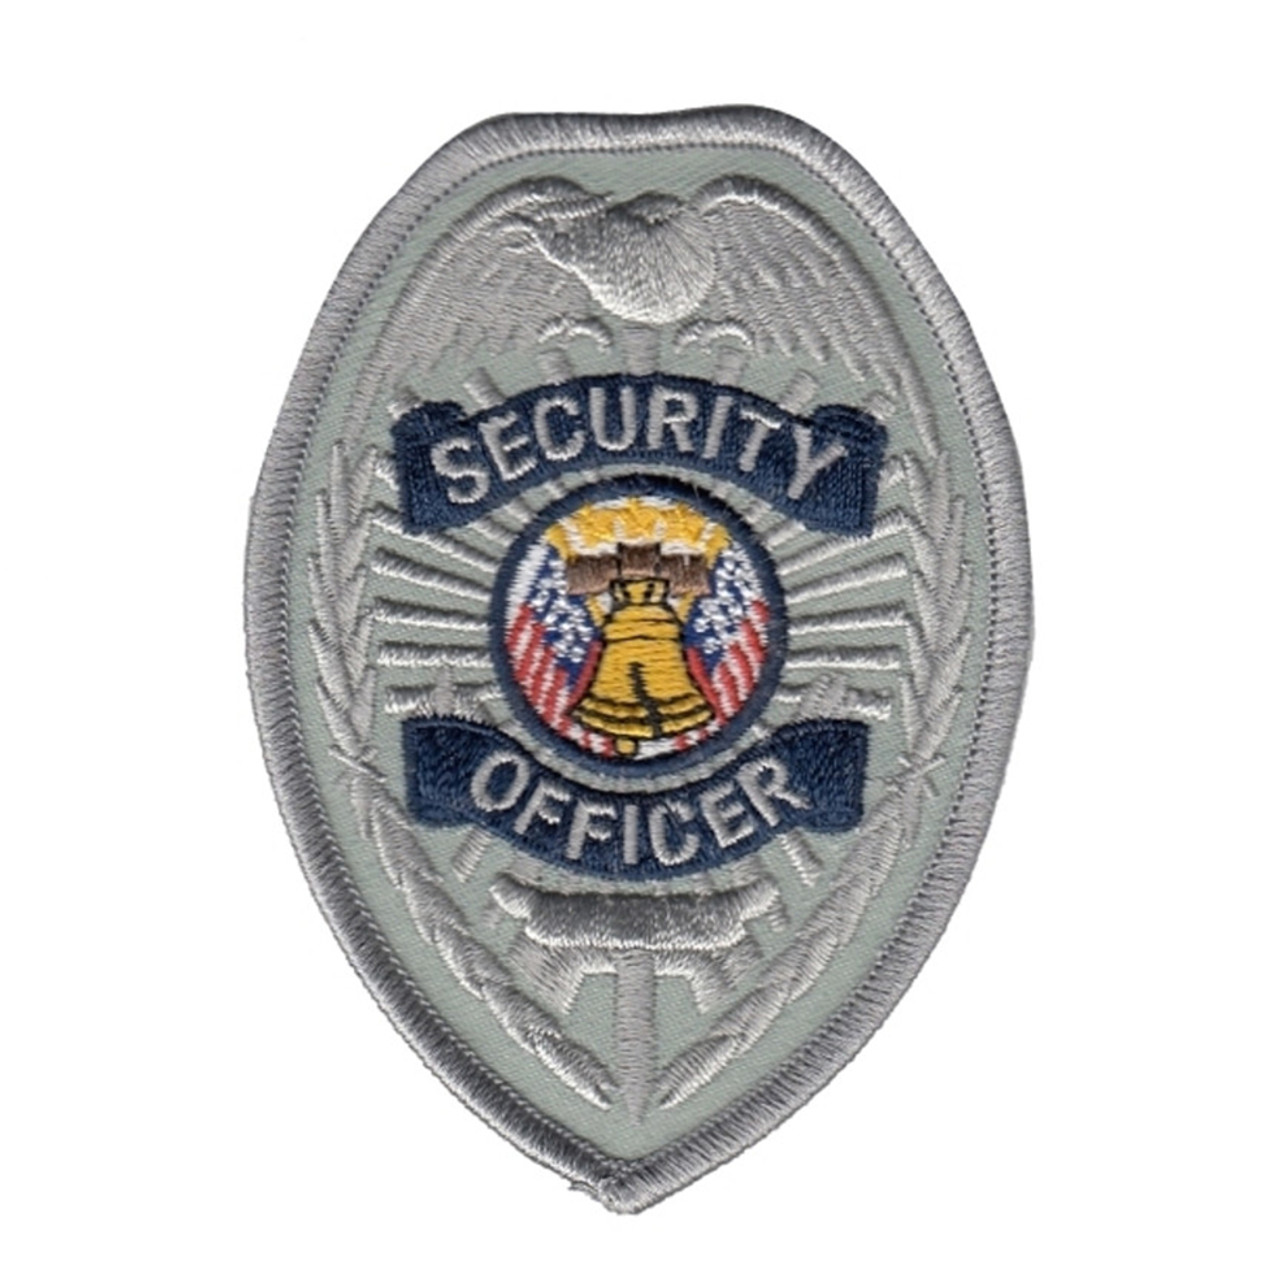 SECURITY ENFORCEMENT OFFICER Badge Patch, Silver/Navy, 2-3/8x3-1/2